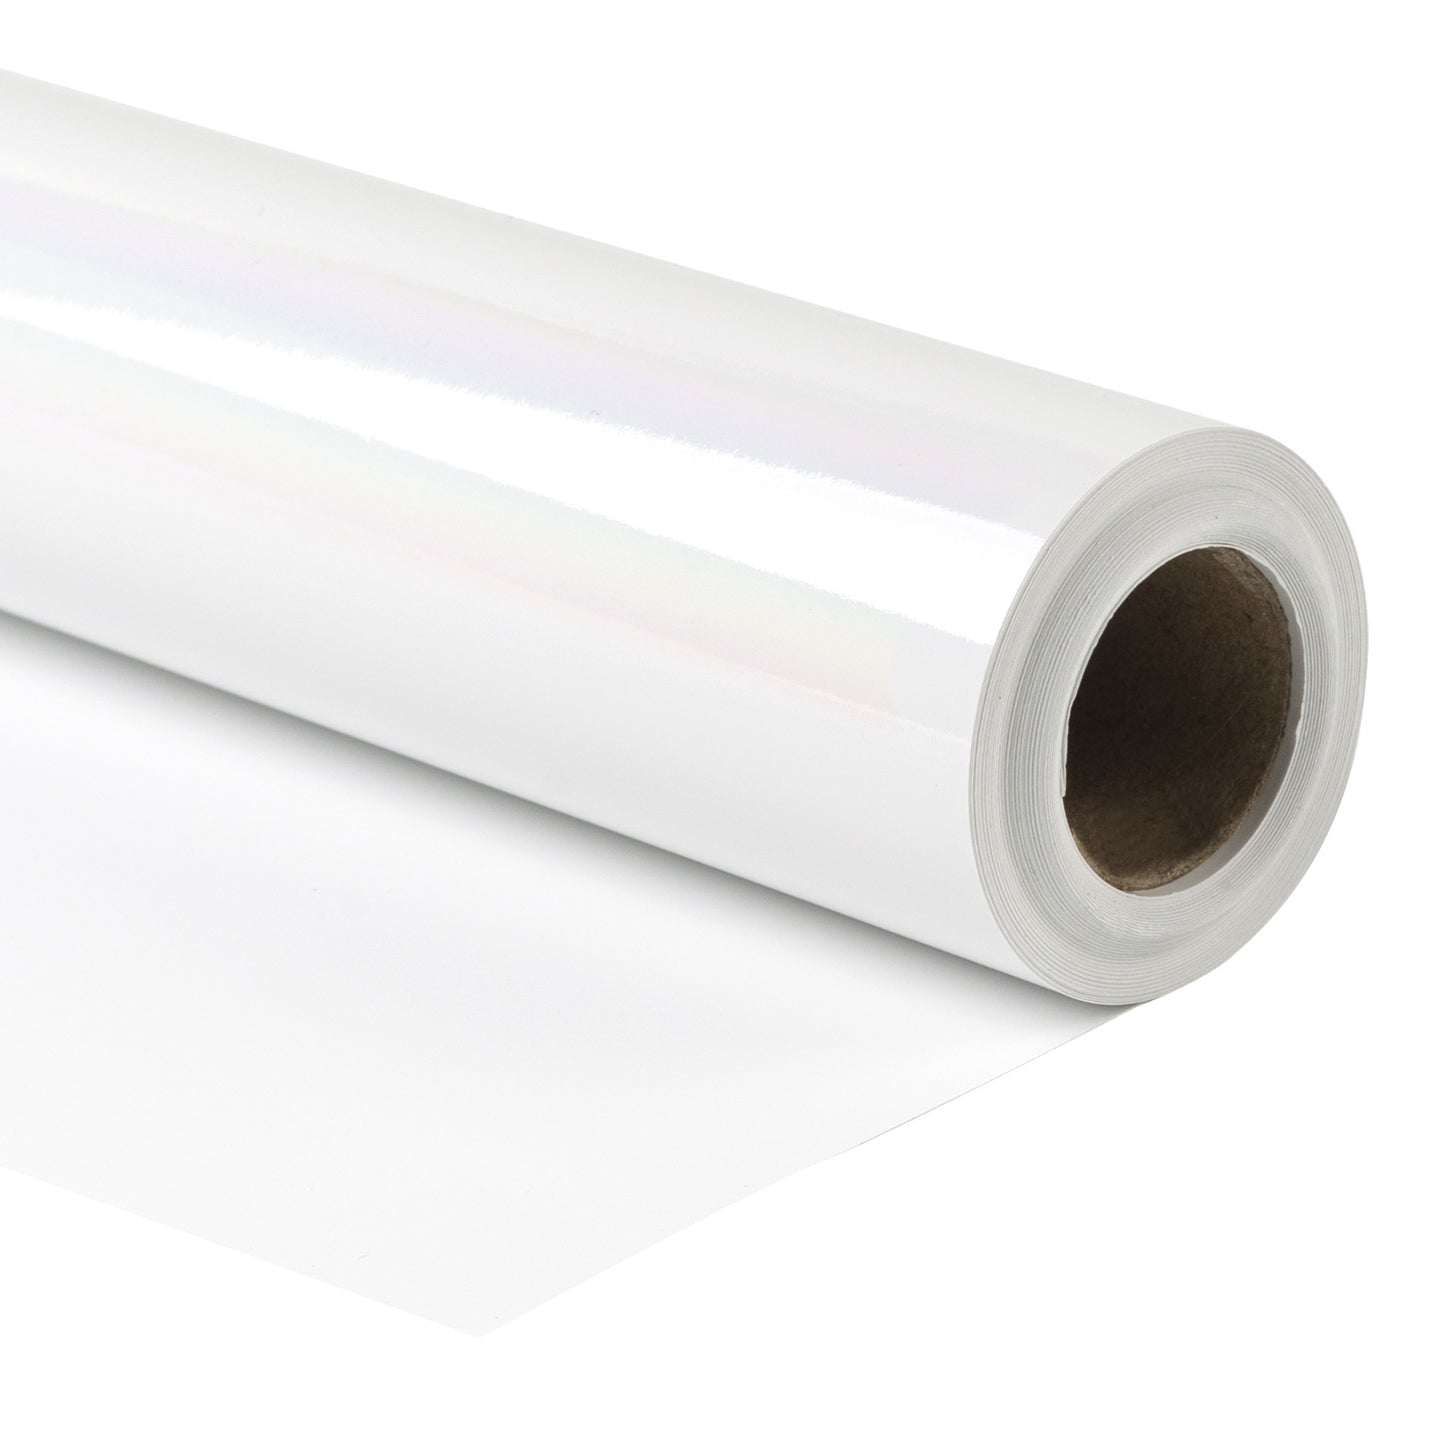 Glossy Metallic Wrapping Paper Roll White Ream Wholesale Wrapaholic